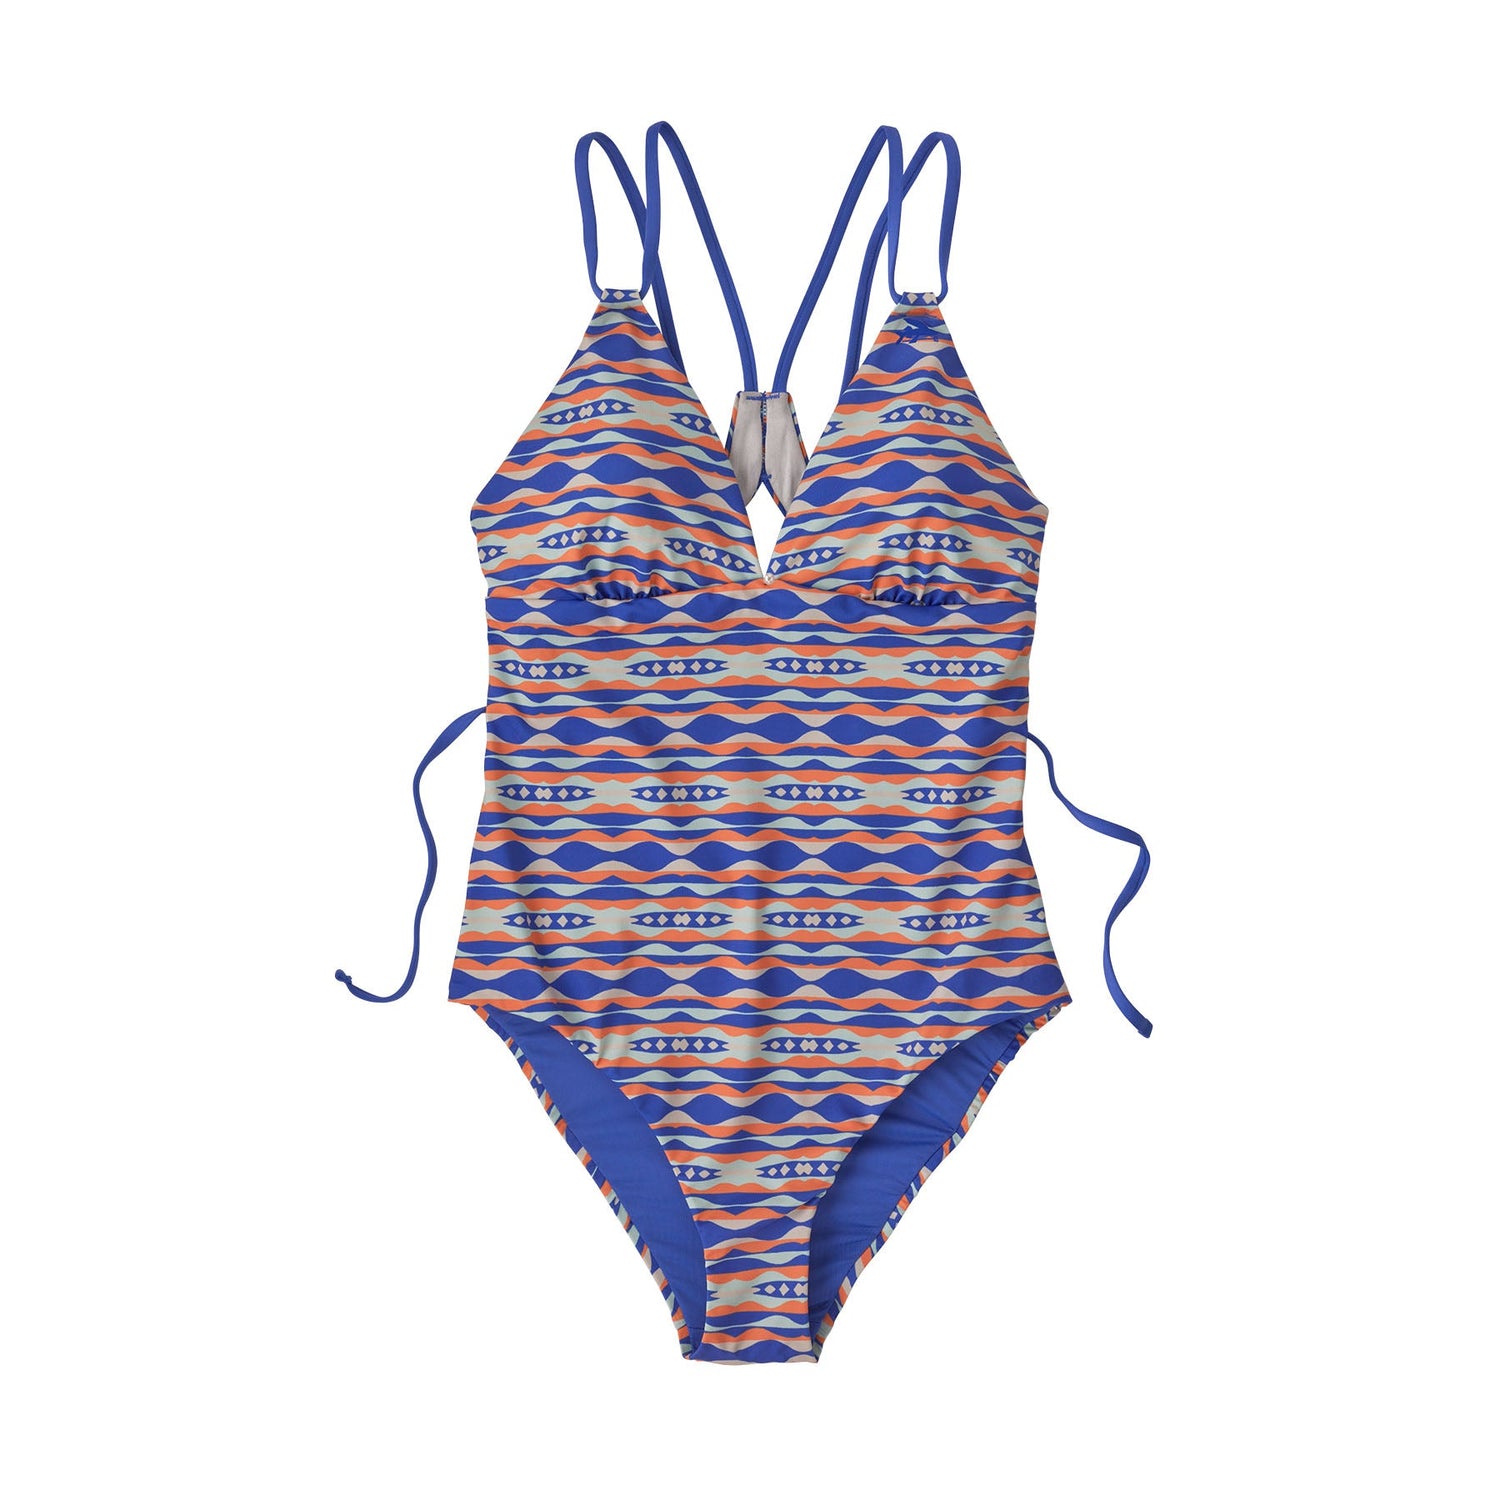 Patagonia - W's Nanogrip Sunset Swell Swimsuit - Recycled Plastic - Weekendbee - sustainable sportswear